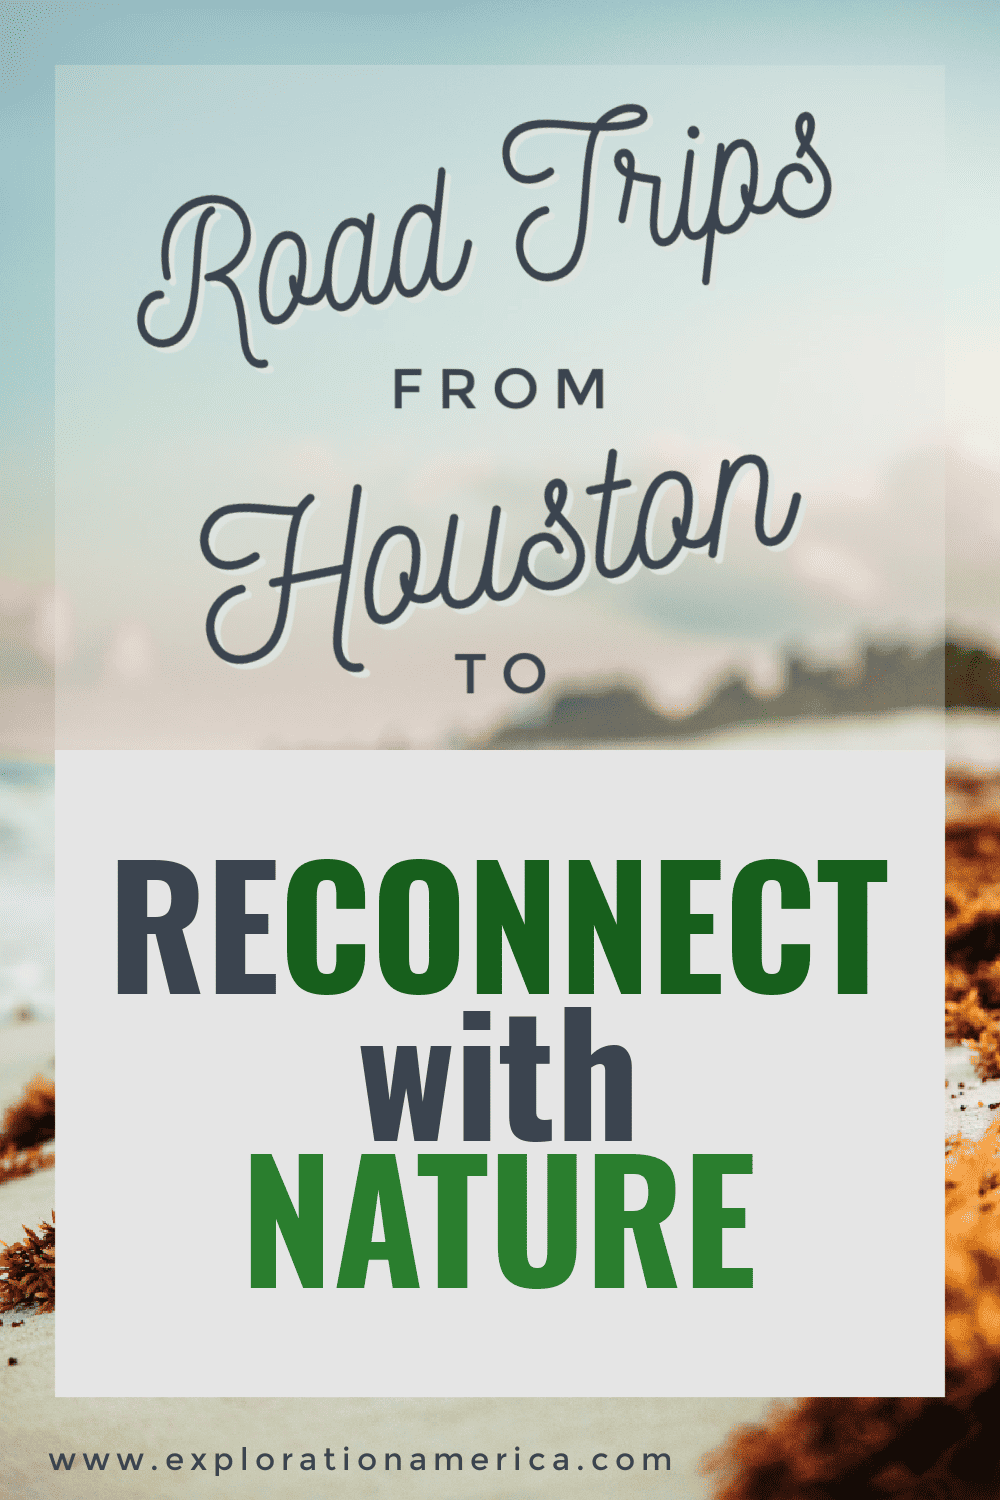 Road Trips from Houston to Reconnect with Nature